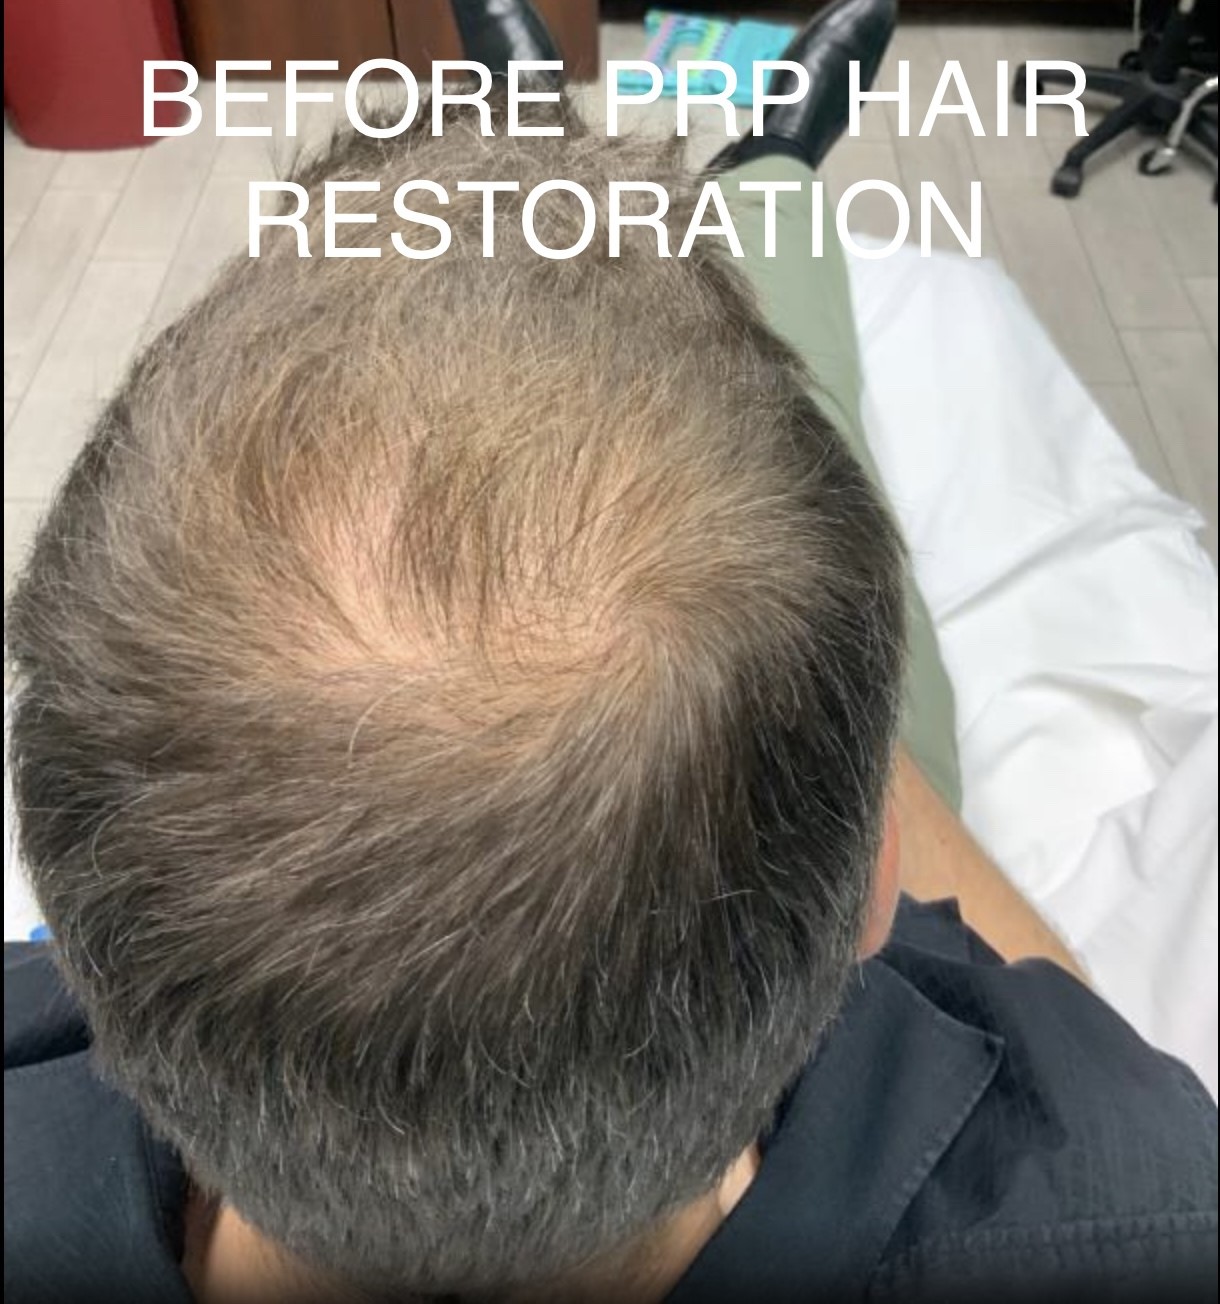 PRP Hair Therapy vs. FUE Hair Transplant and cost in Delhi | Desmoderm